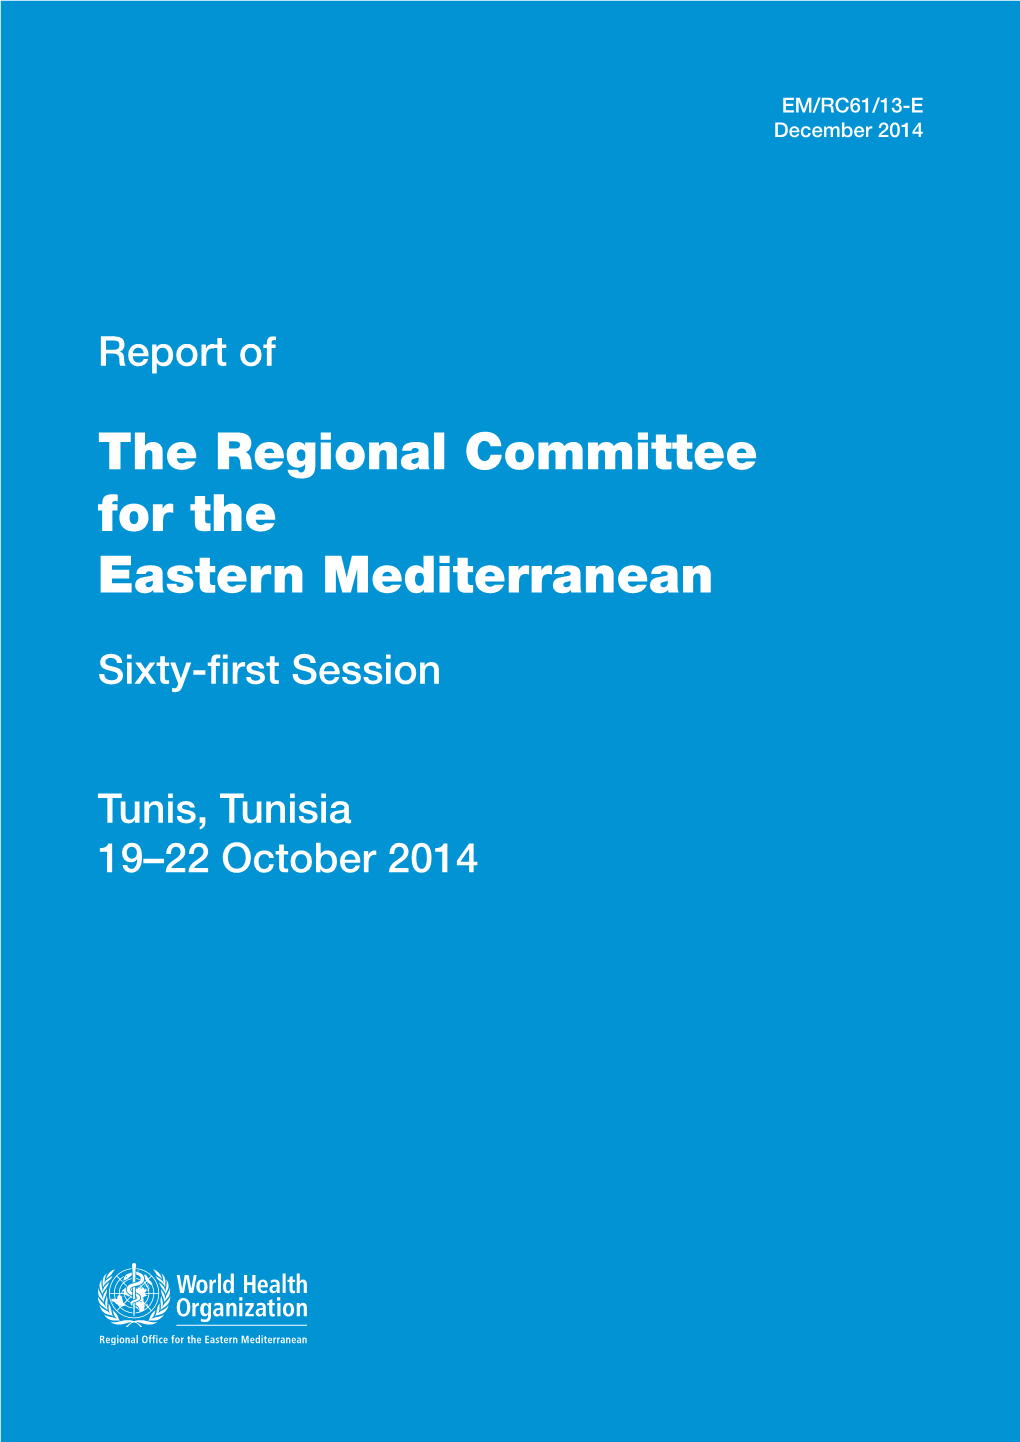 The Regional Committee for the Eastern Mediterranean